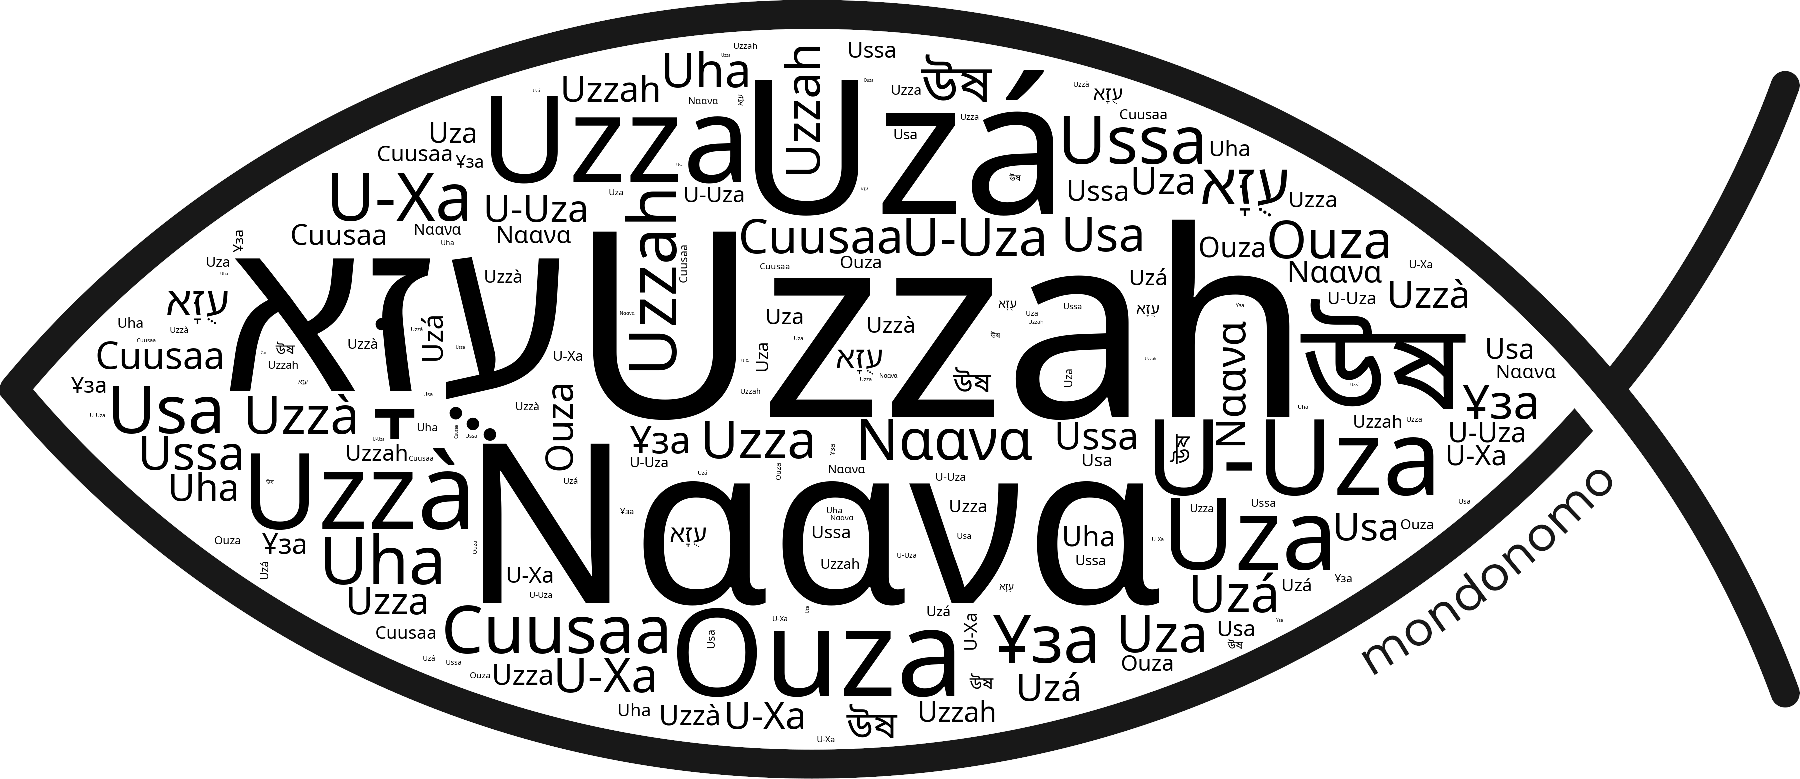 Name Uzzah in the world's Bibles